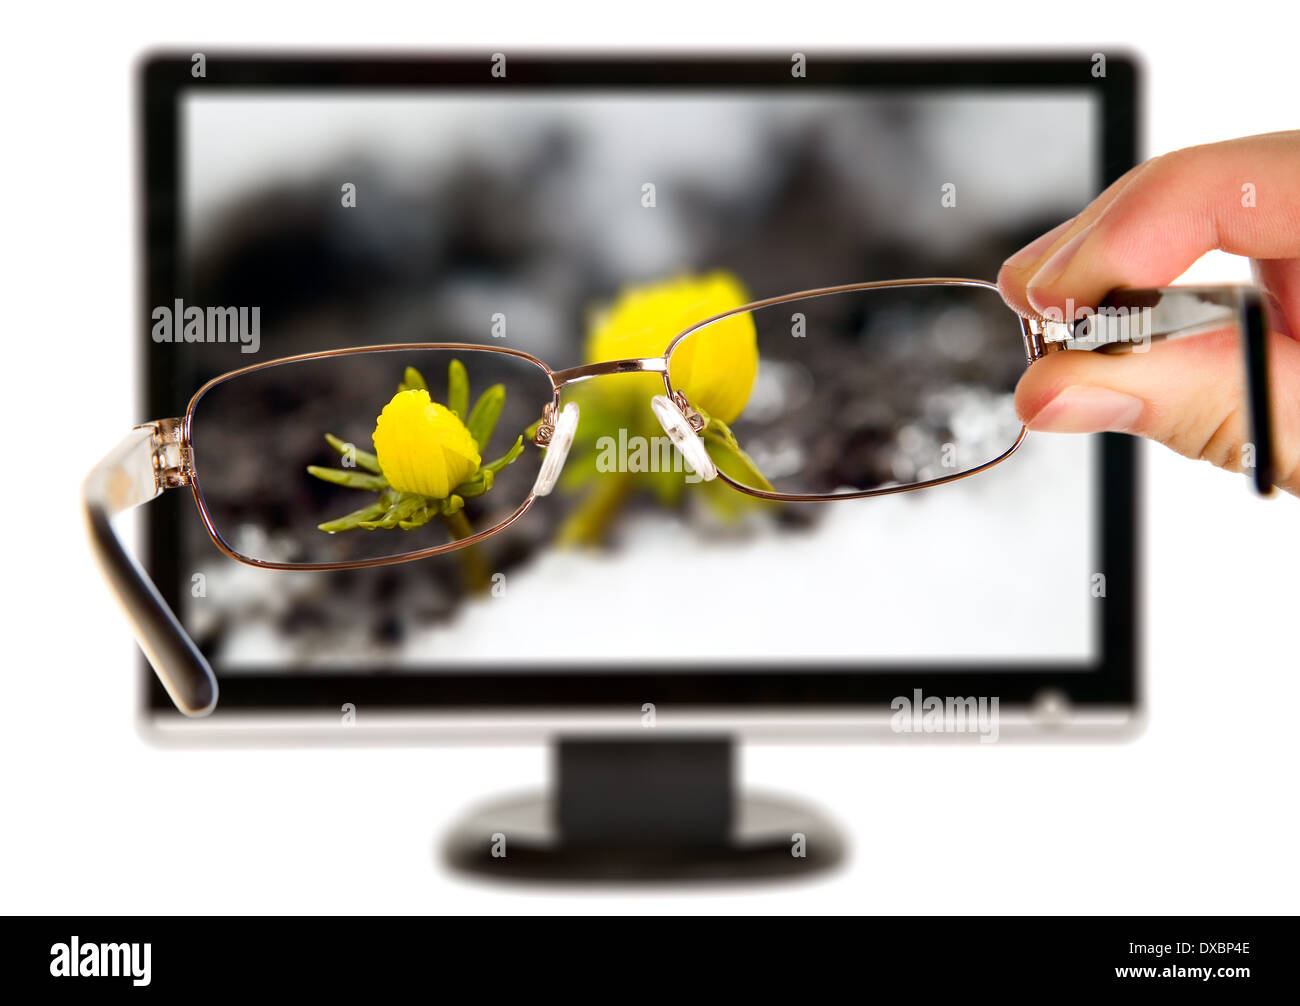 Man is viewing to yellow flower on display through eyeglasses Stock Photo